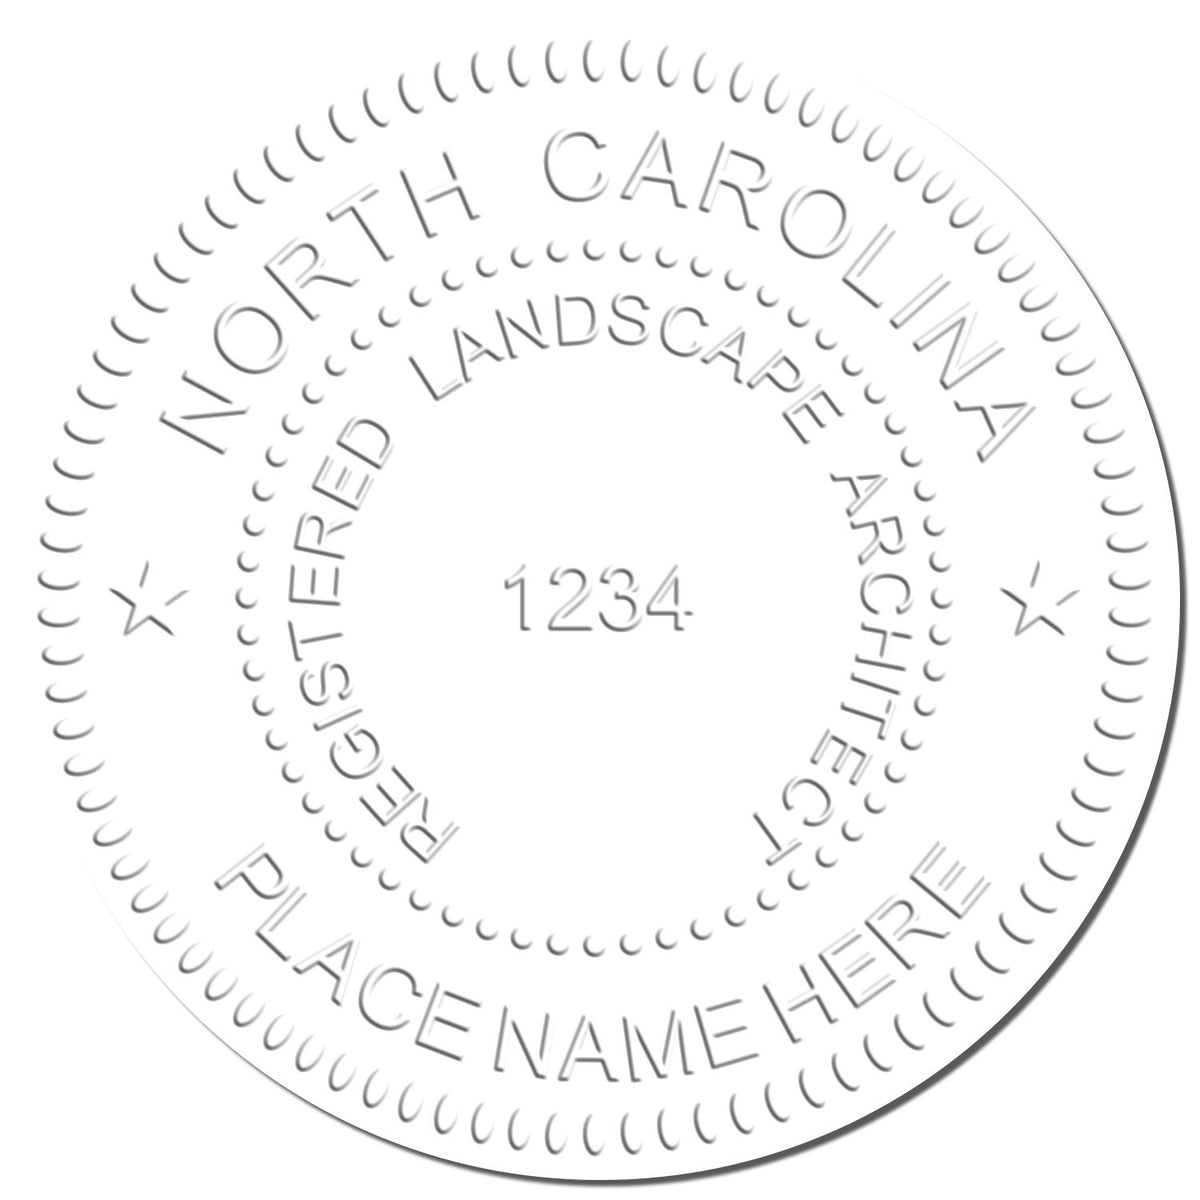 This paper is stamped with a sample imprint of the Gift North Carolina Landscape Architect Seal, signifying its quality and reliability.